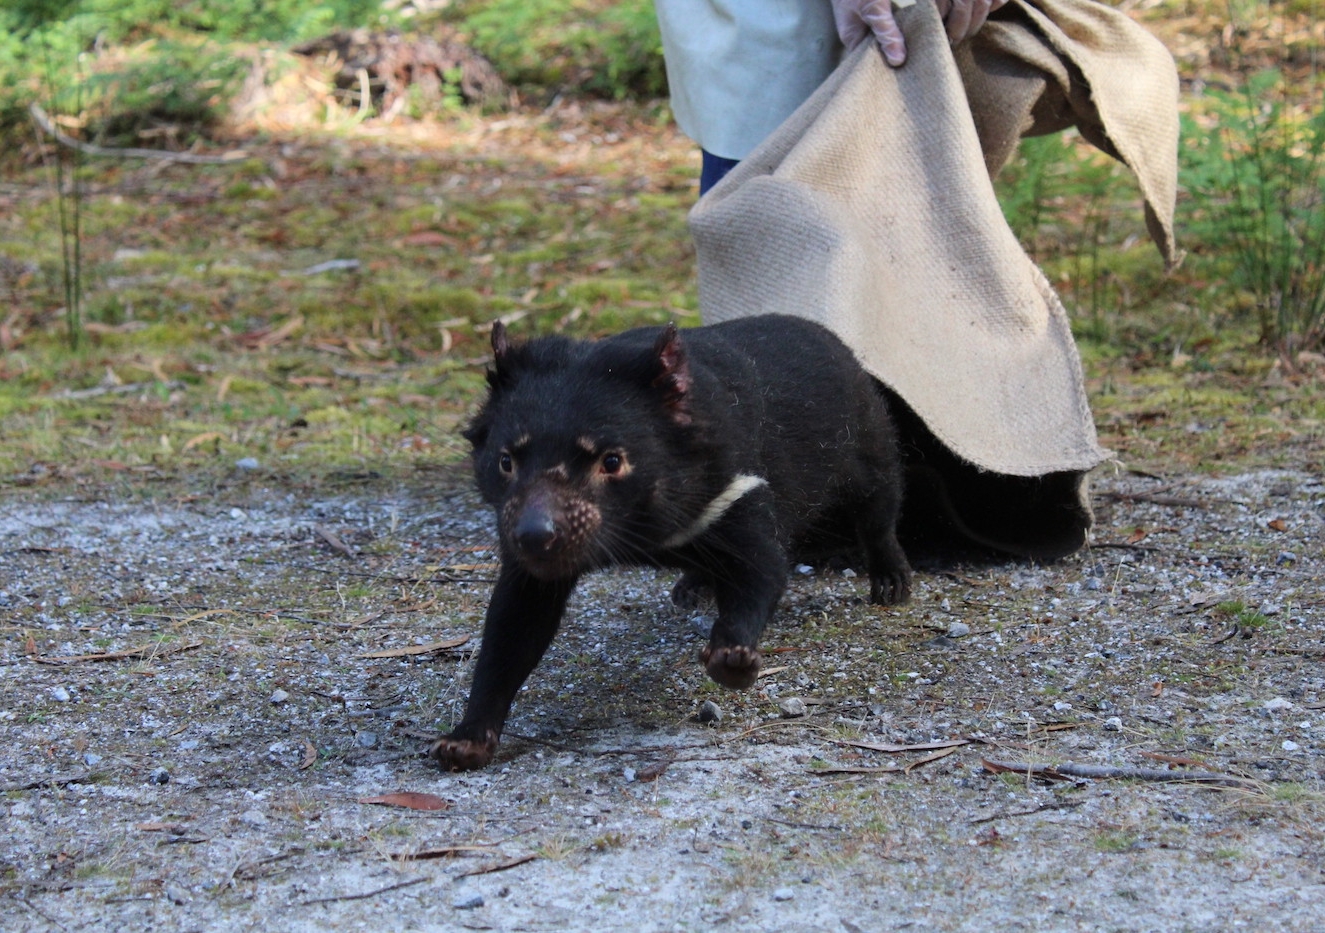 The study found the diet of Tasmanian devils became more restrictive the more their habitat was impacted by humans. Photo: Ariana Ananda.